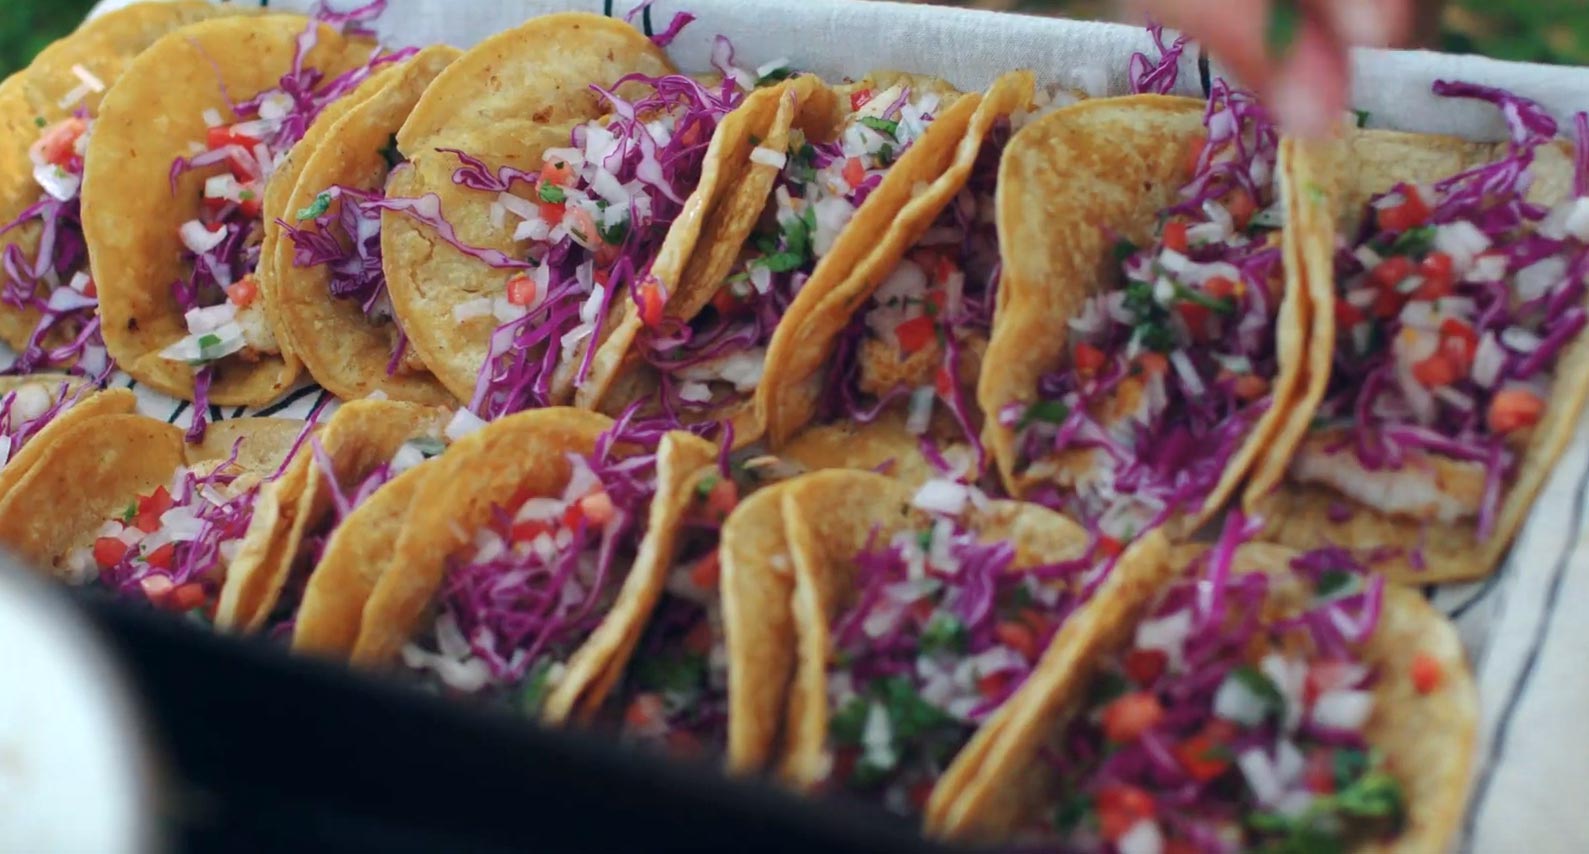 Getting hungry? Some delicious-looking lionfish tacos are served up!